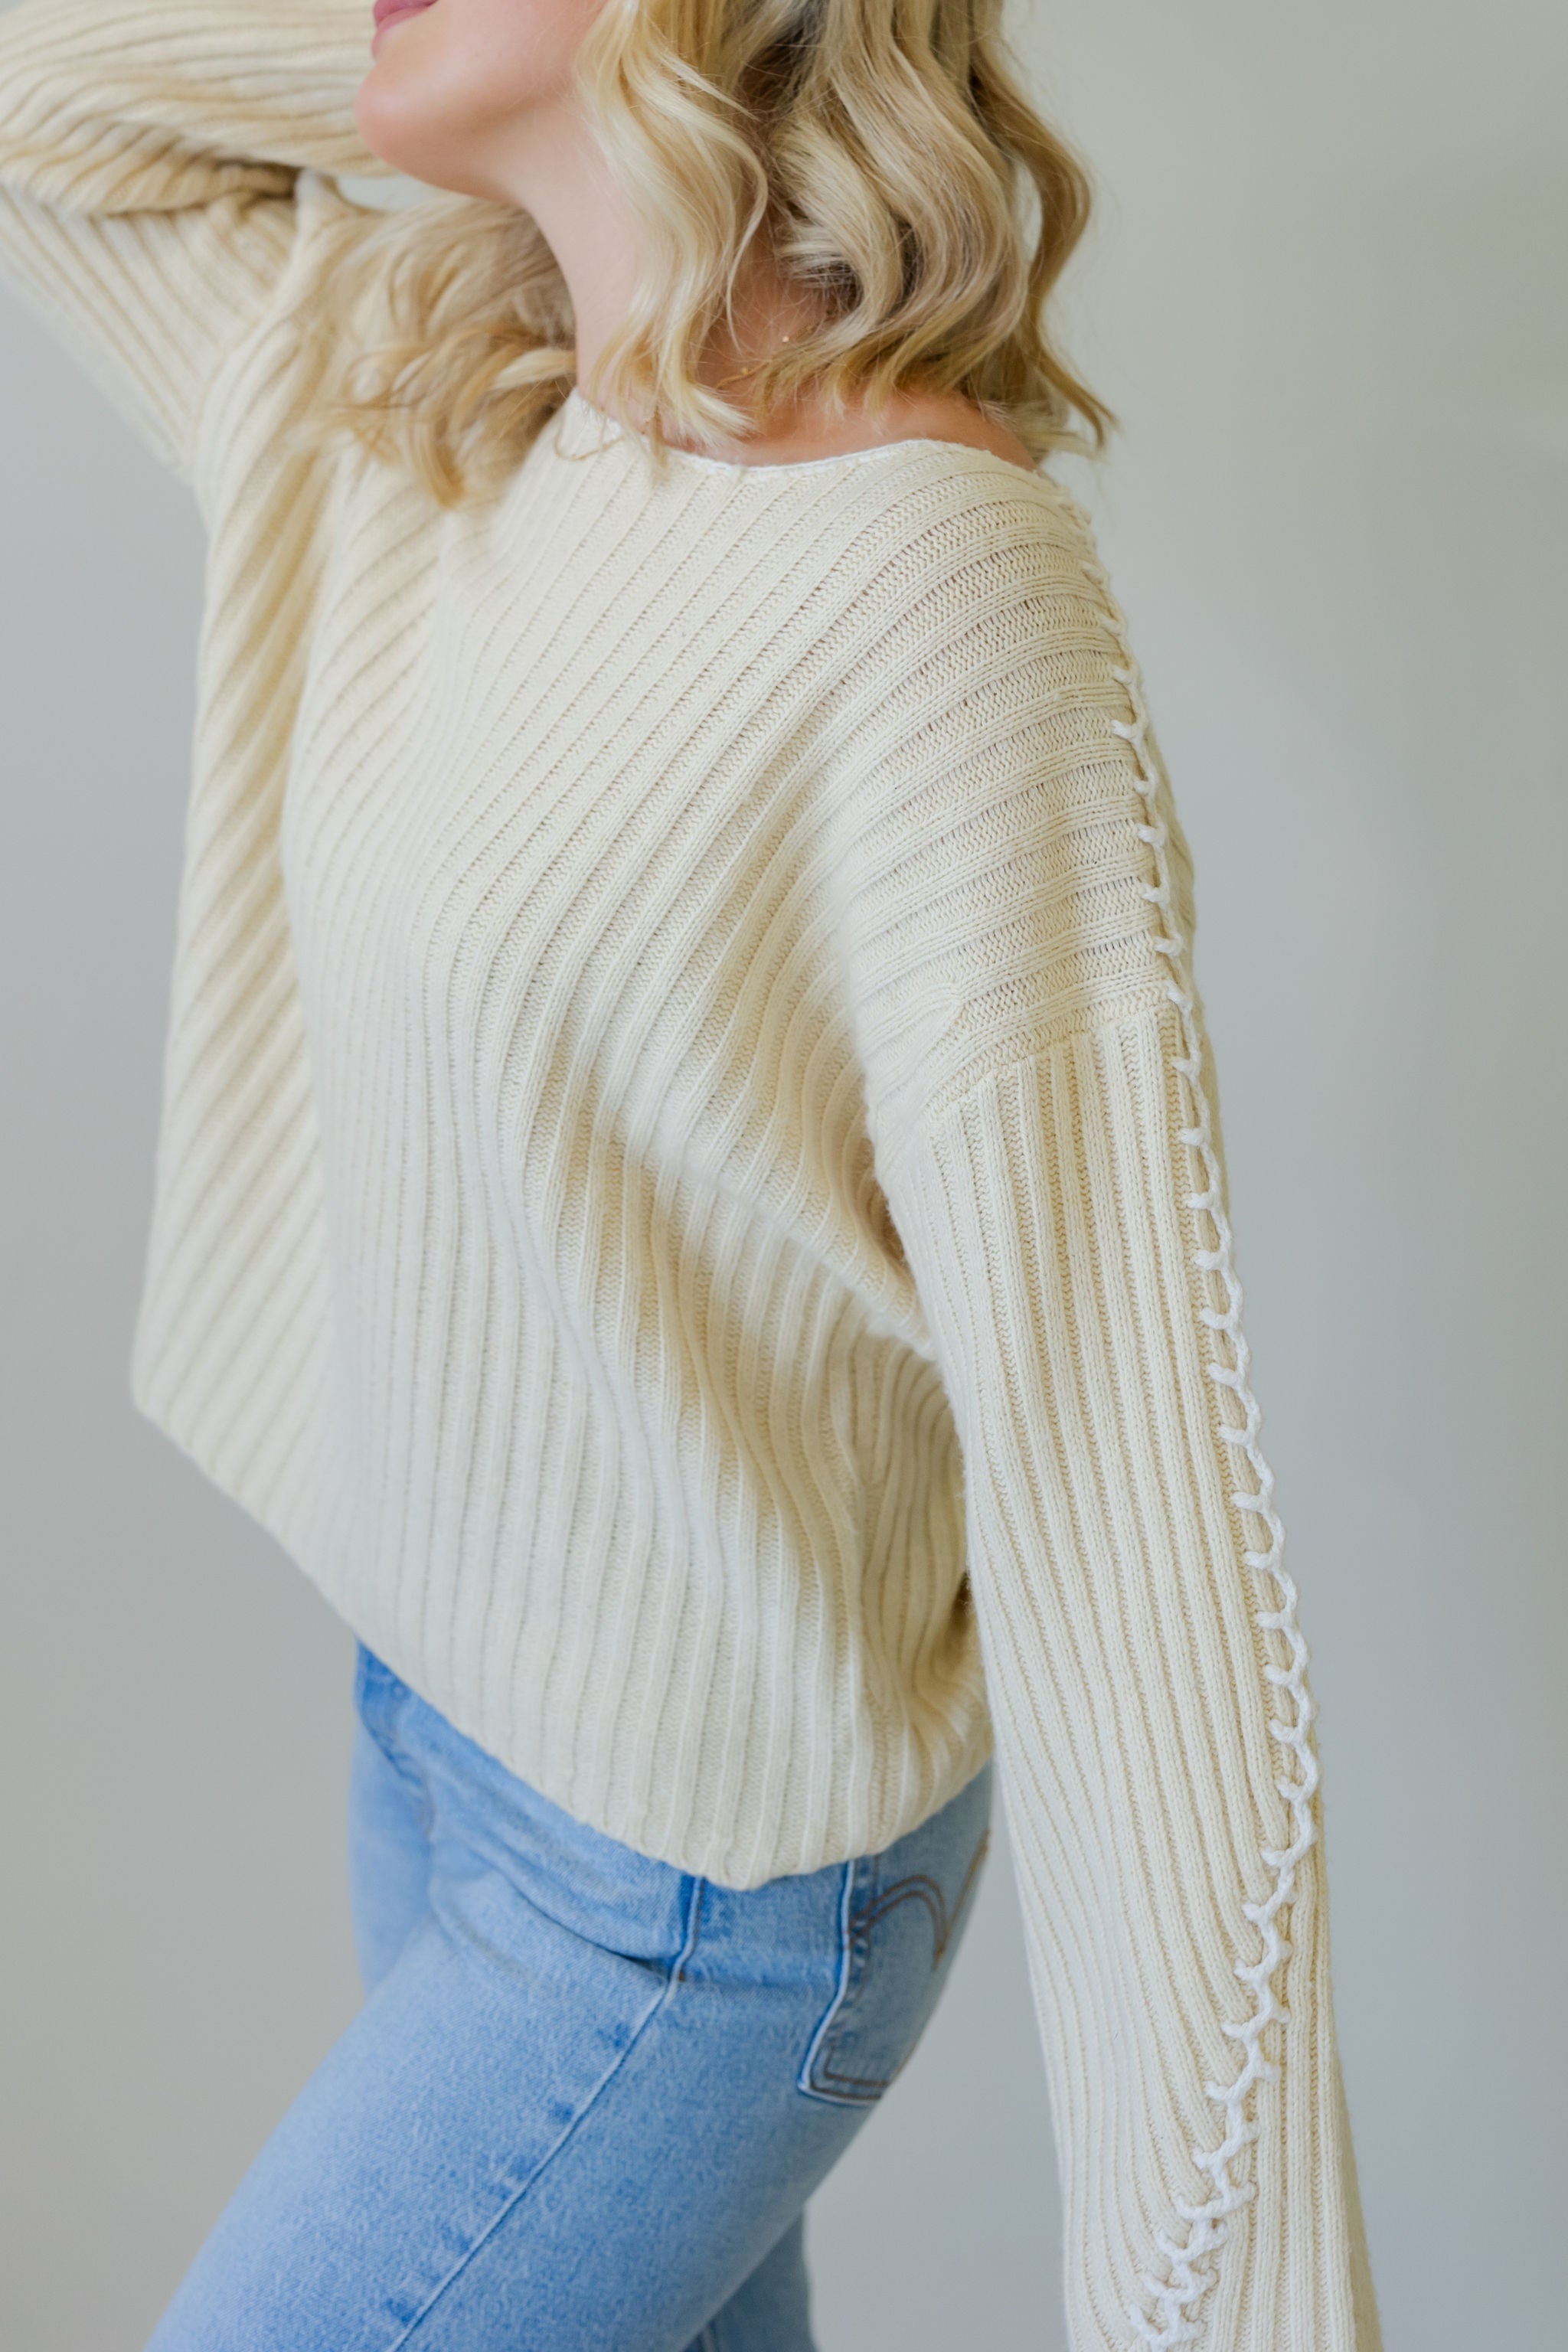 Something Sweet Knit Sweater by For Good